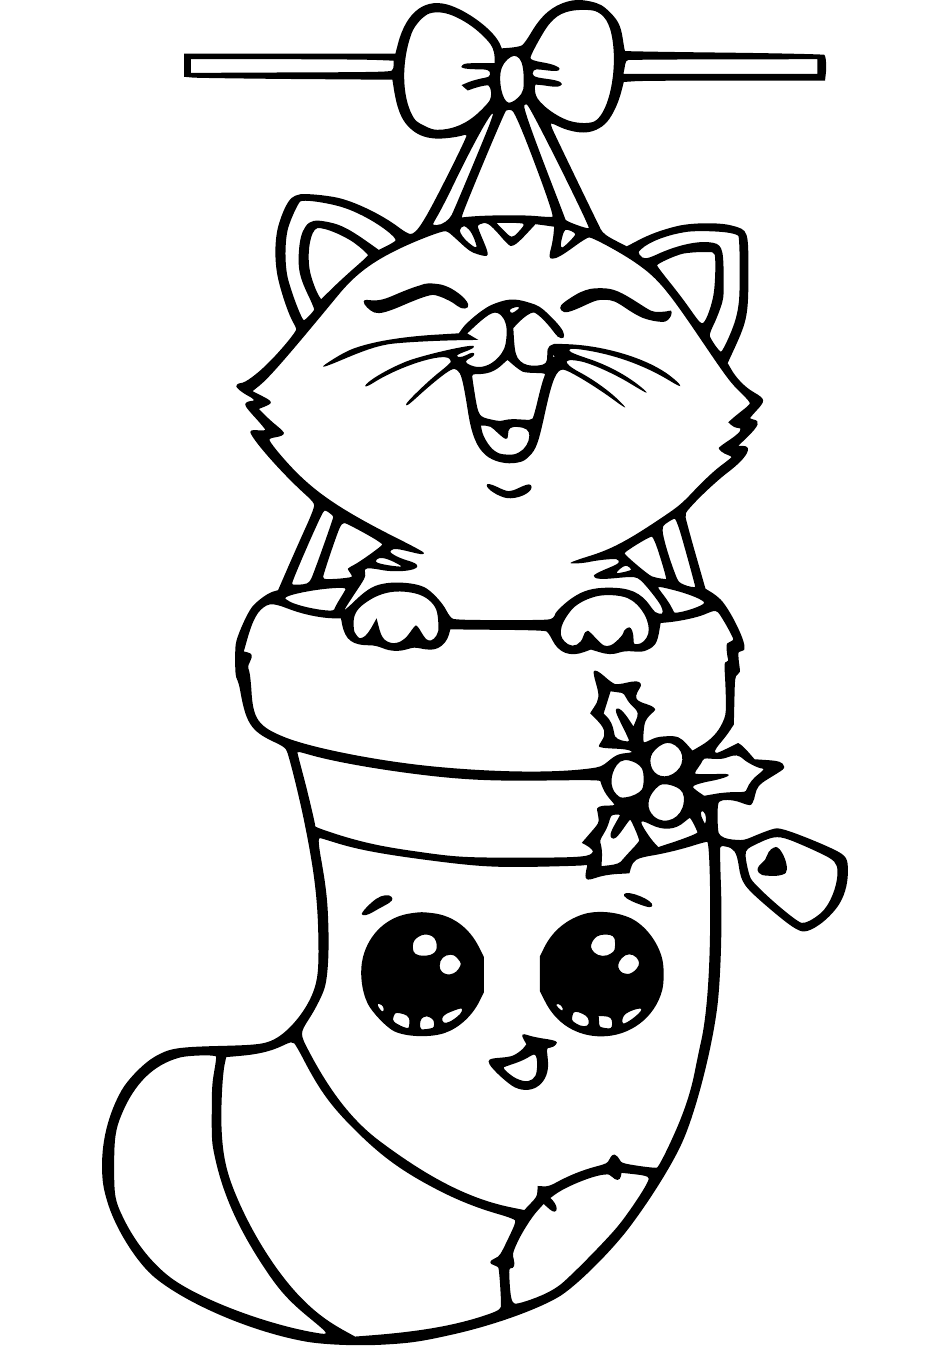 Christmas Cat in Cute Stocking Coloring Sheet - TemplateRoller